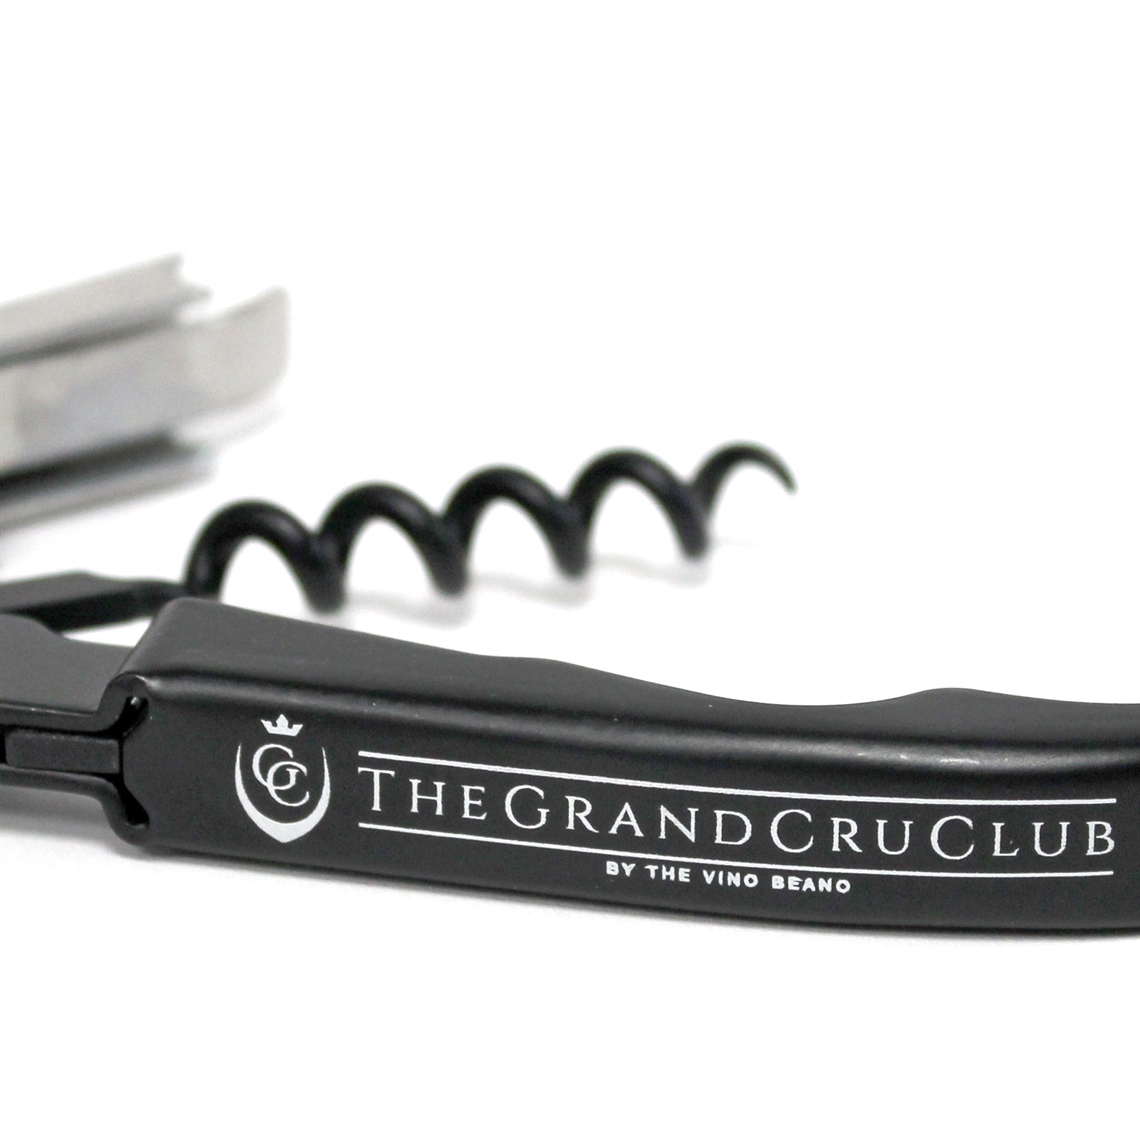 View more foil cutters from our Branded Corkscrews & Bottle Openers range